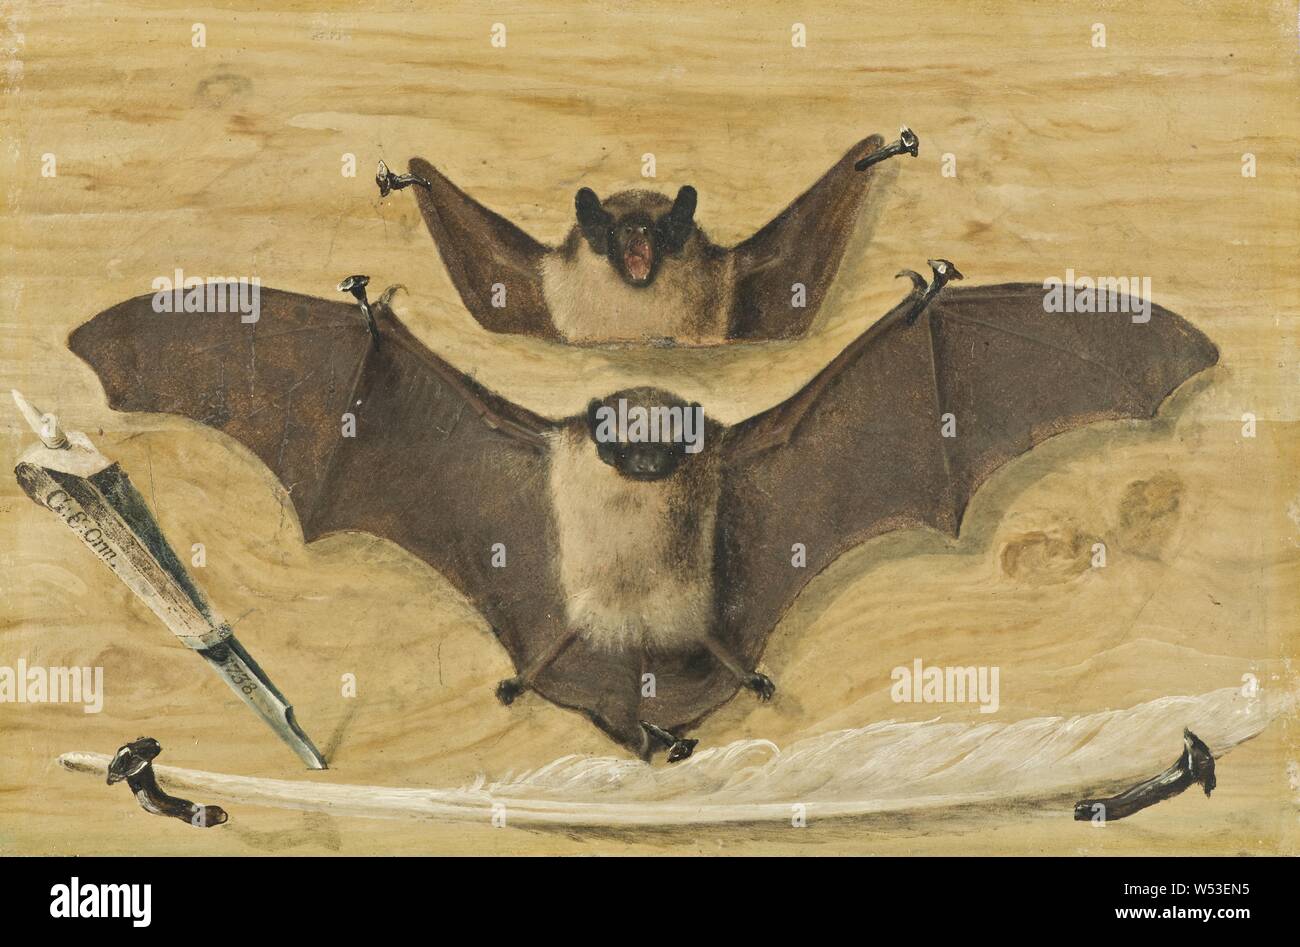 Gabriel Orm, Trompe l'oeil, Two bats nailed to a timber wall, knife and quill pen ('The Bat Painting'), two on a board wall with nails suspended leather patches, knife and quill, painting, 1738, Oil on paper or vellum mounted on metal, Oil on paper or parchment laid on iron plate, Height, 29.4 cm (11.5 inches), Width, 19.6 cm (7.7 inches), Inscription, 174, on paper note à tergo, Signed, G, E, Orm 1738, on knife tv, about the bat Stock Photo